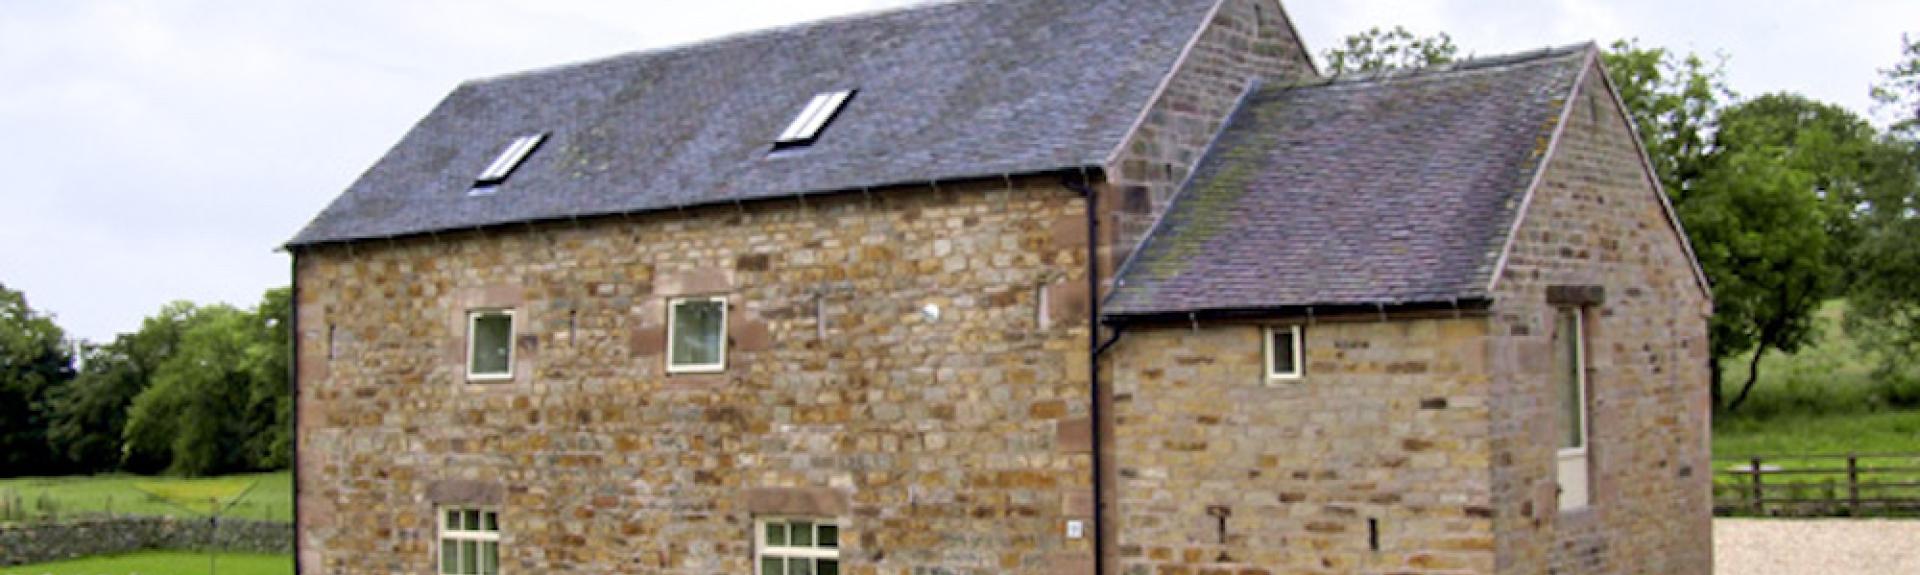 Exterior of a 2-storey, stone-built,  barn conversion in a rural Peak District location.